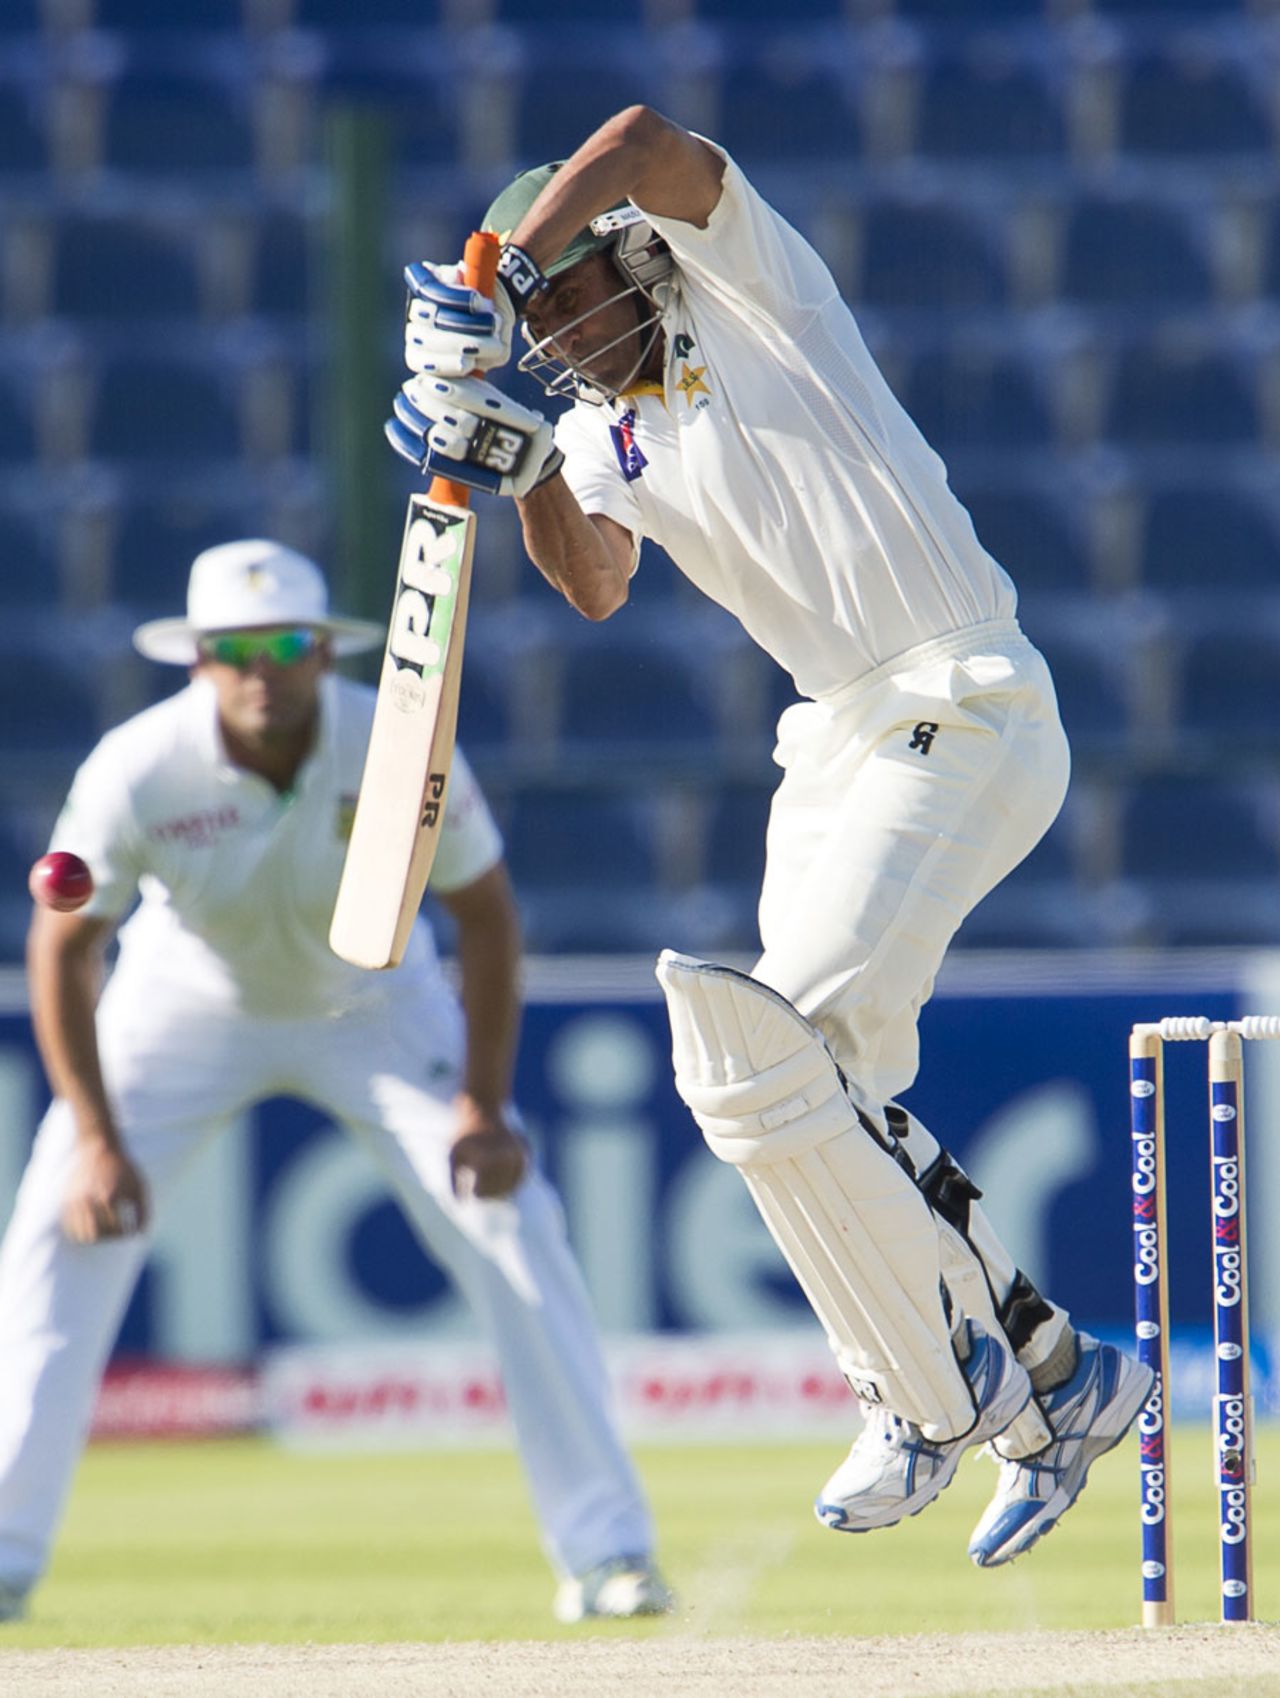 Younis Khan jumps off his feet while defending the ball, Pakistan v South Africa, 1st Test, 4th day, Abu Dhabi, October 17, 2013